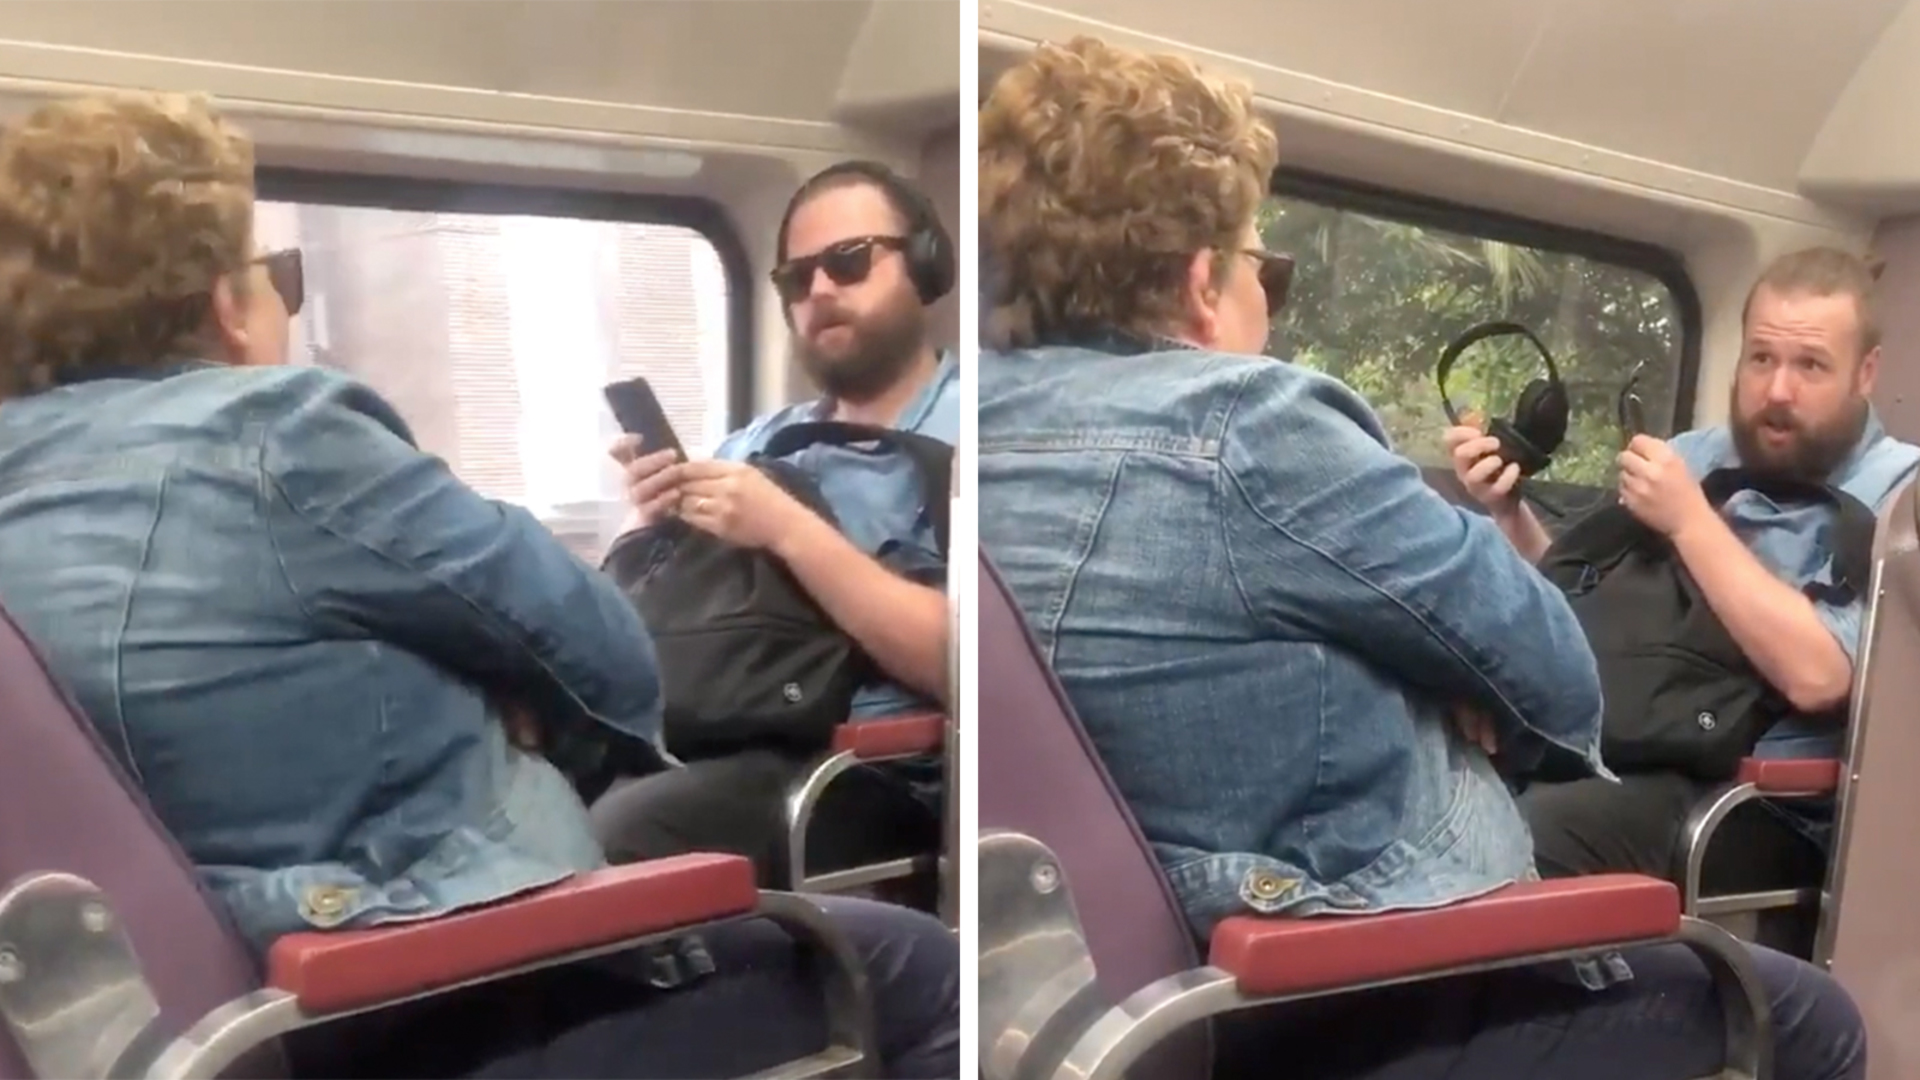 Woman coughs at man during argument over coughing etiquette